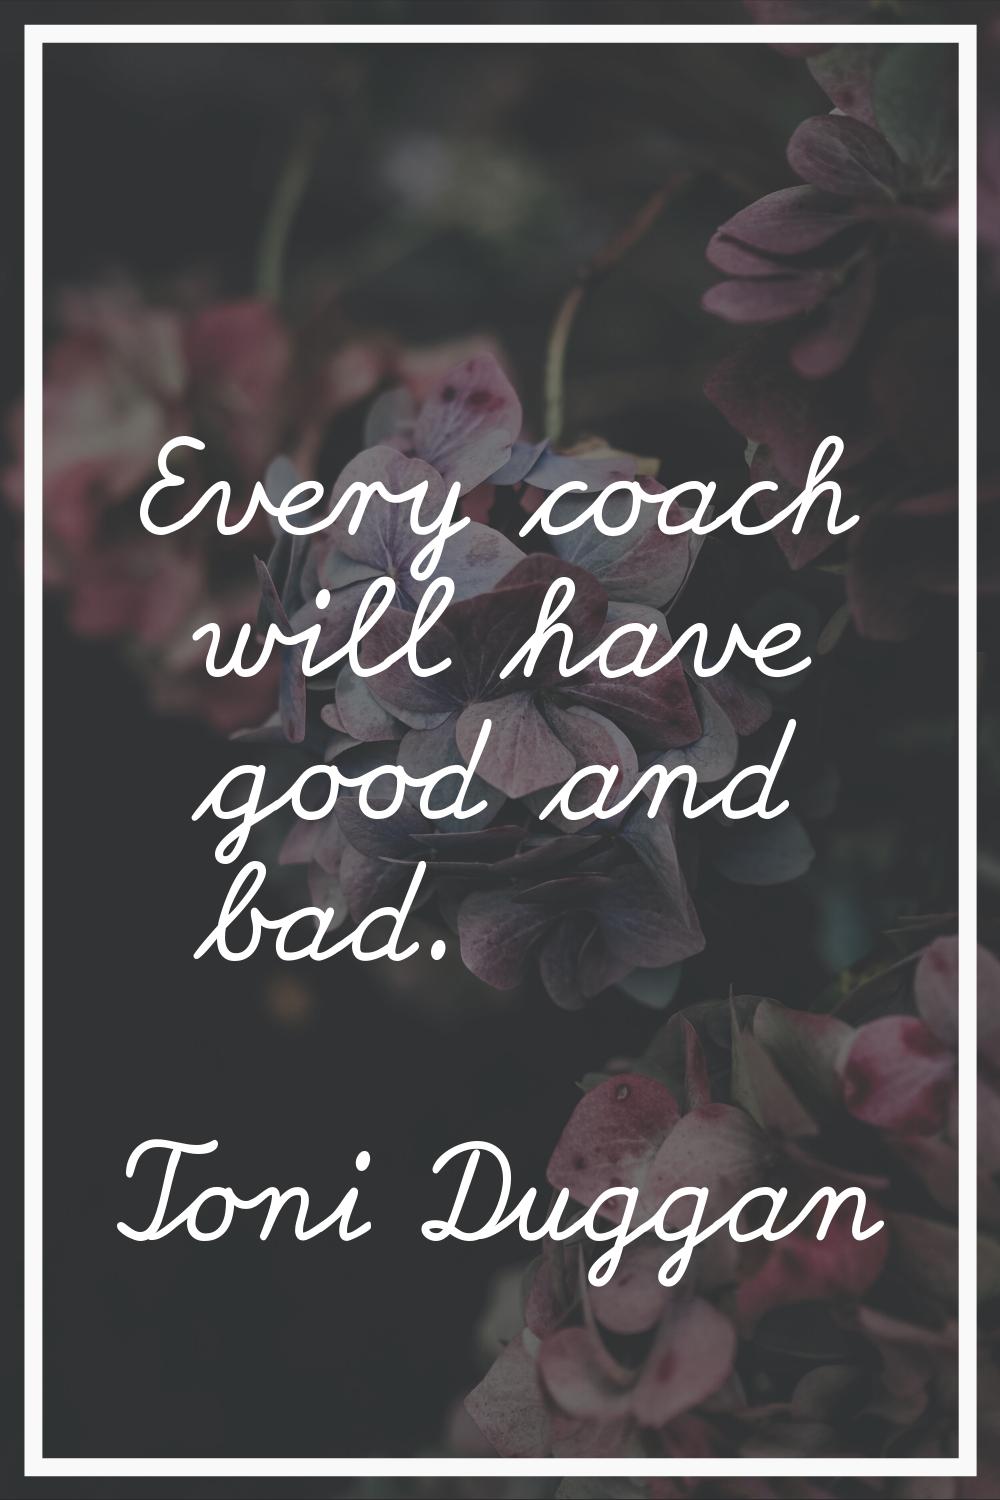 Every coach will have good and bad.